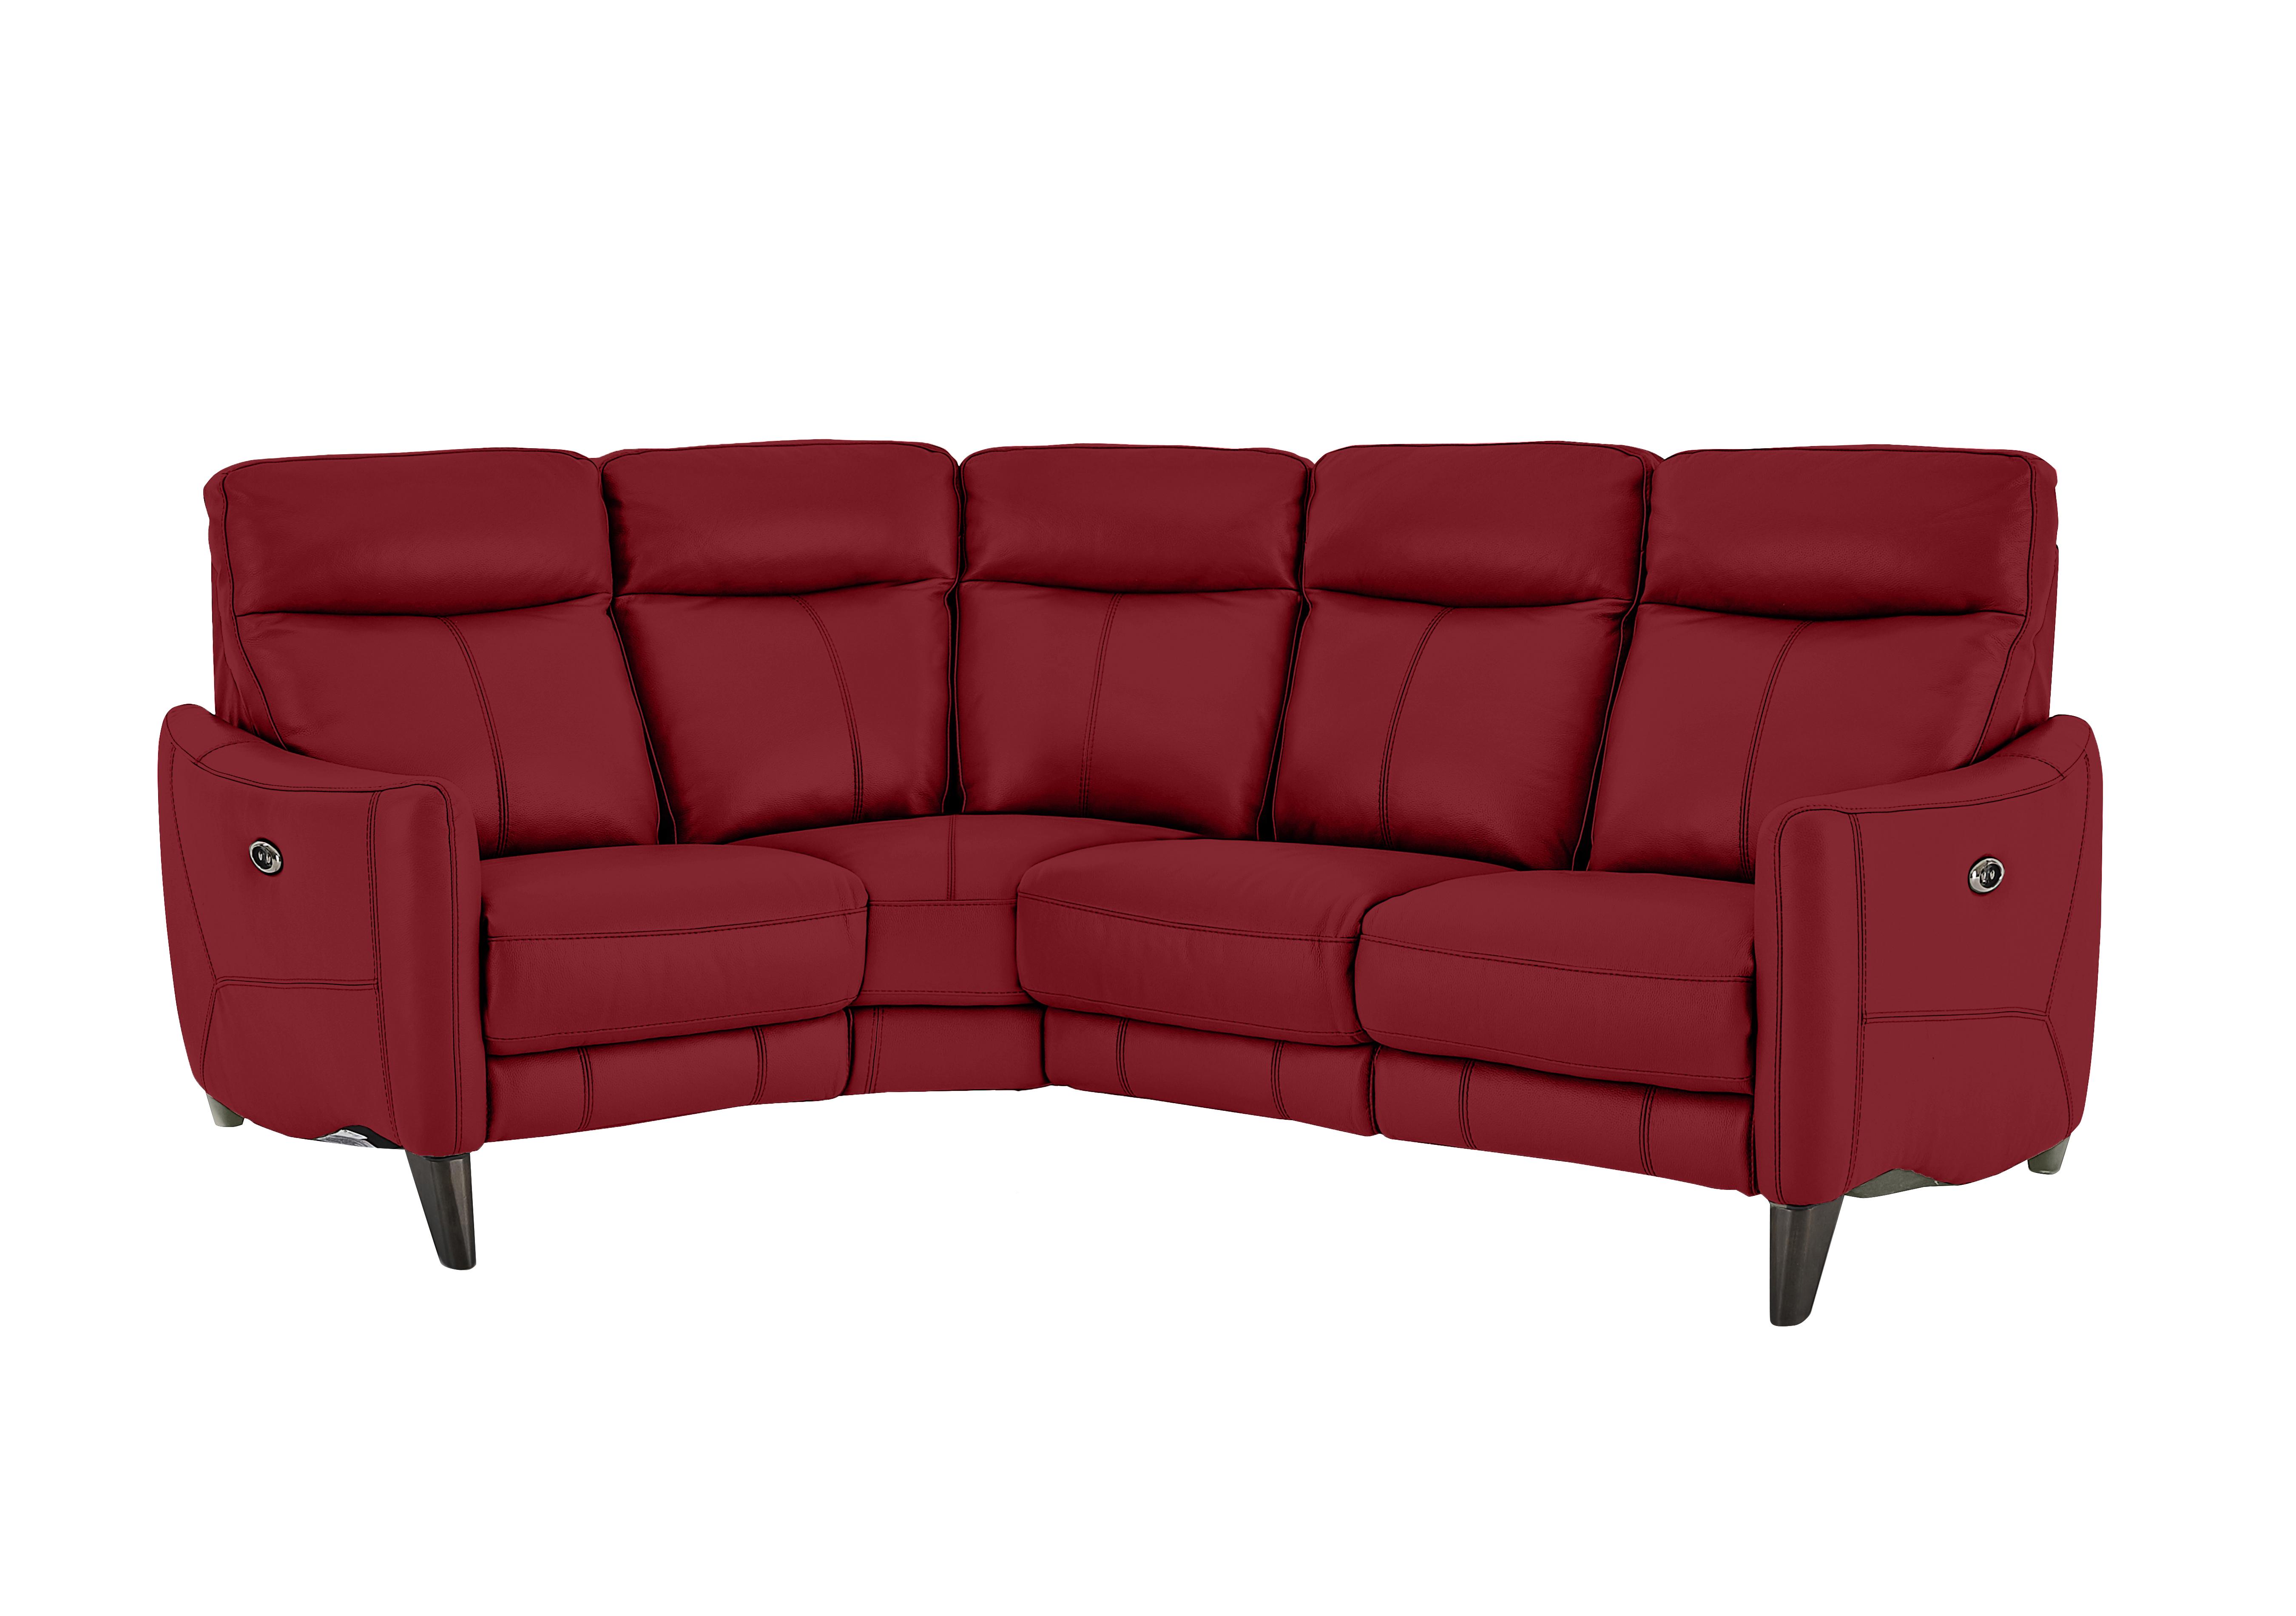 Compact Collection Petit Leather Corner Sofa in Bv-0008 Pure Red on Furniture Village